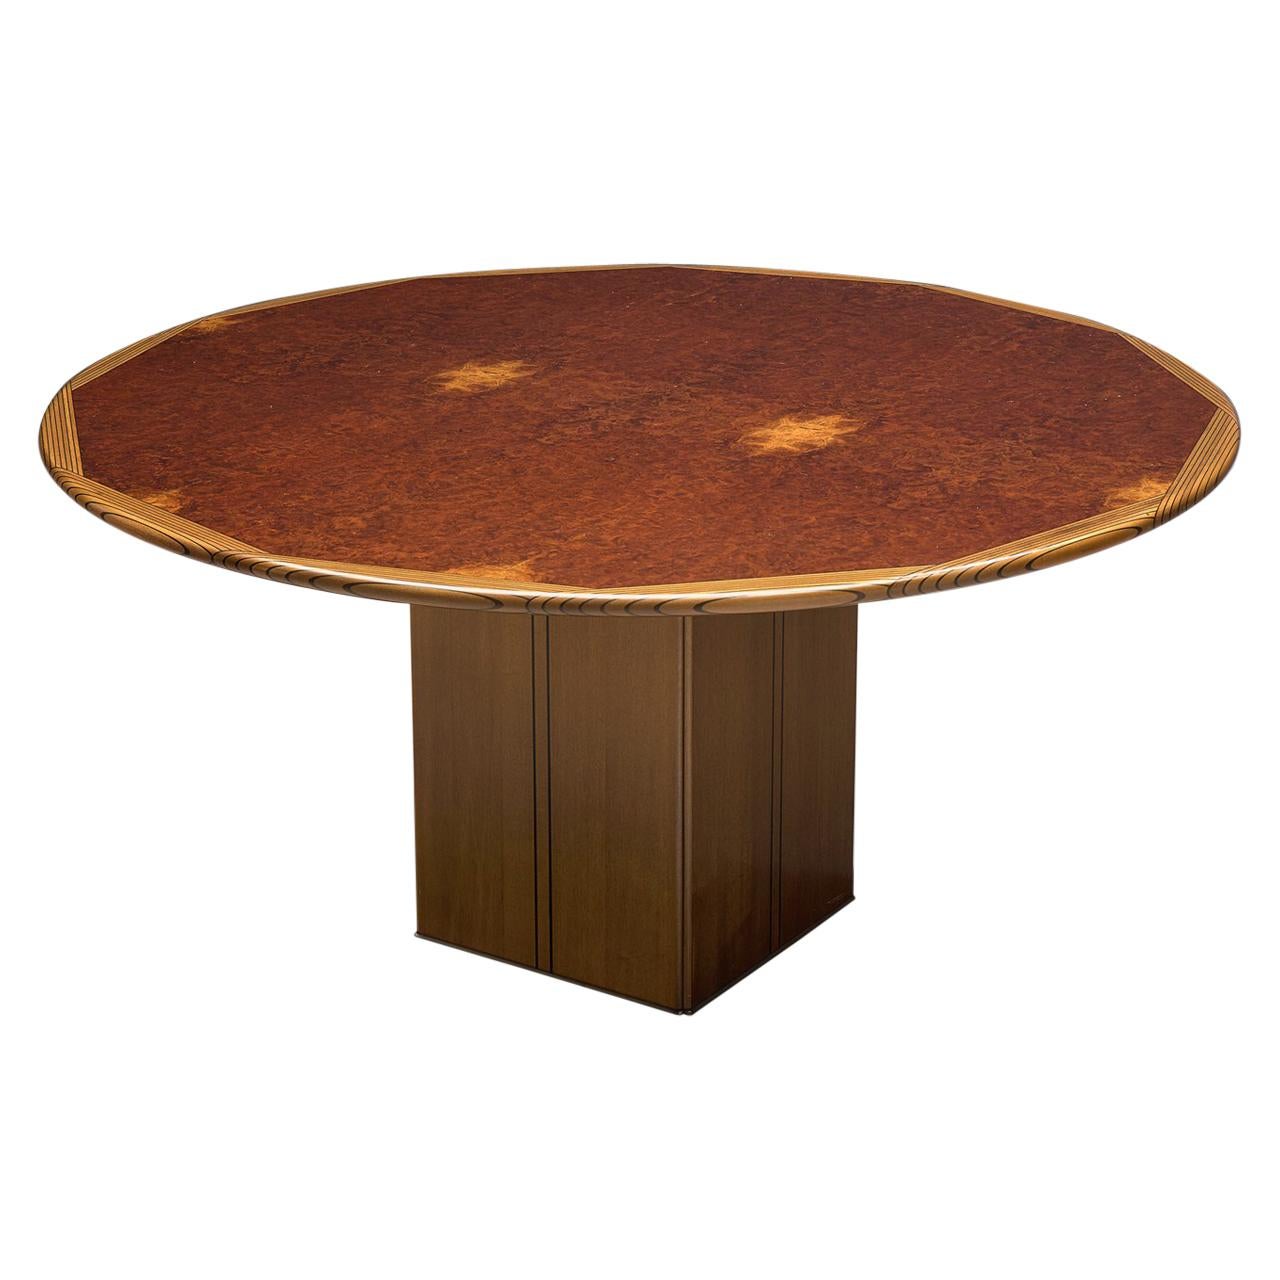 Afra & Tobia Scarpa 'Africa' Dining Table